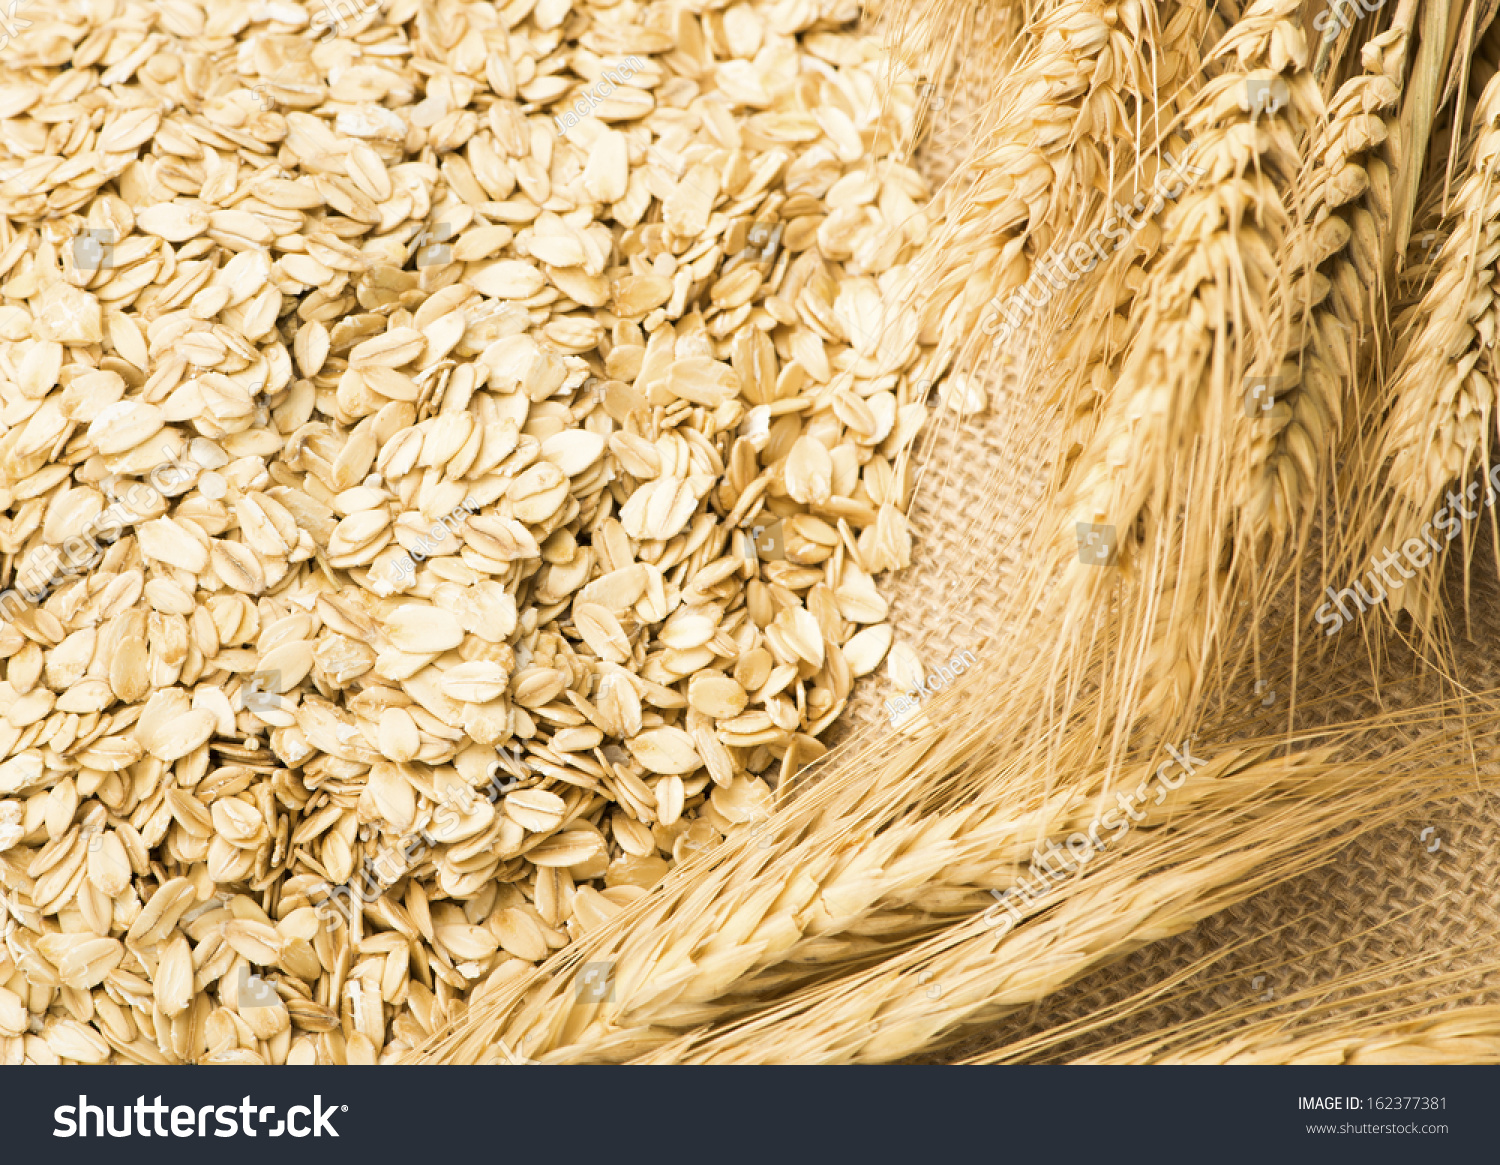 wheat and oats on the burlap #162377381